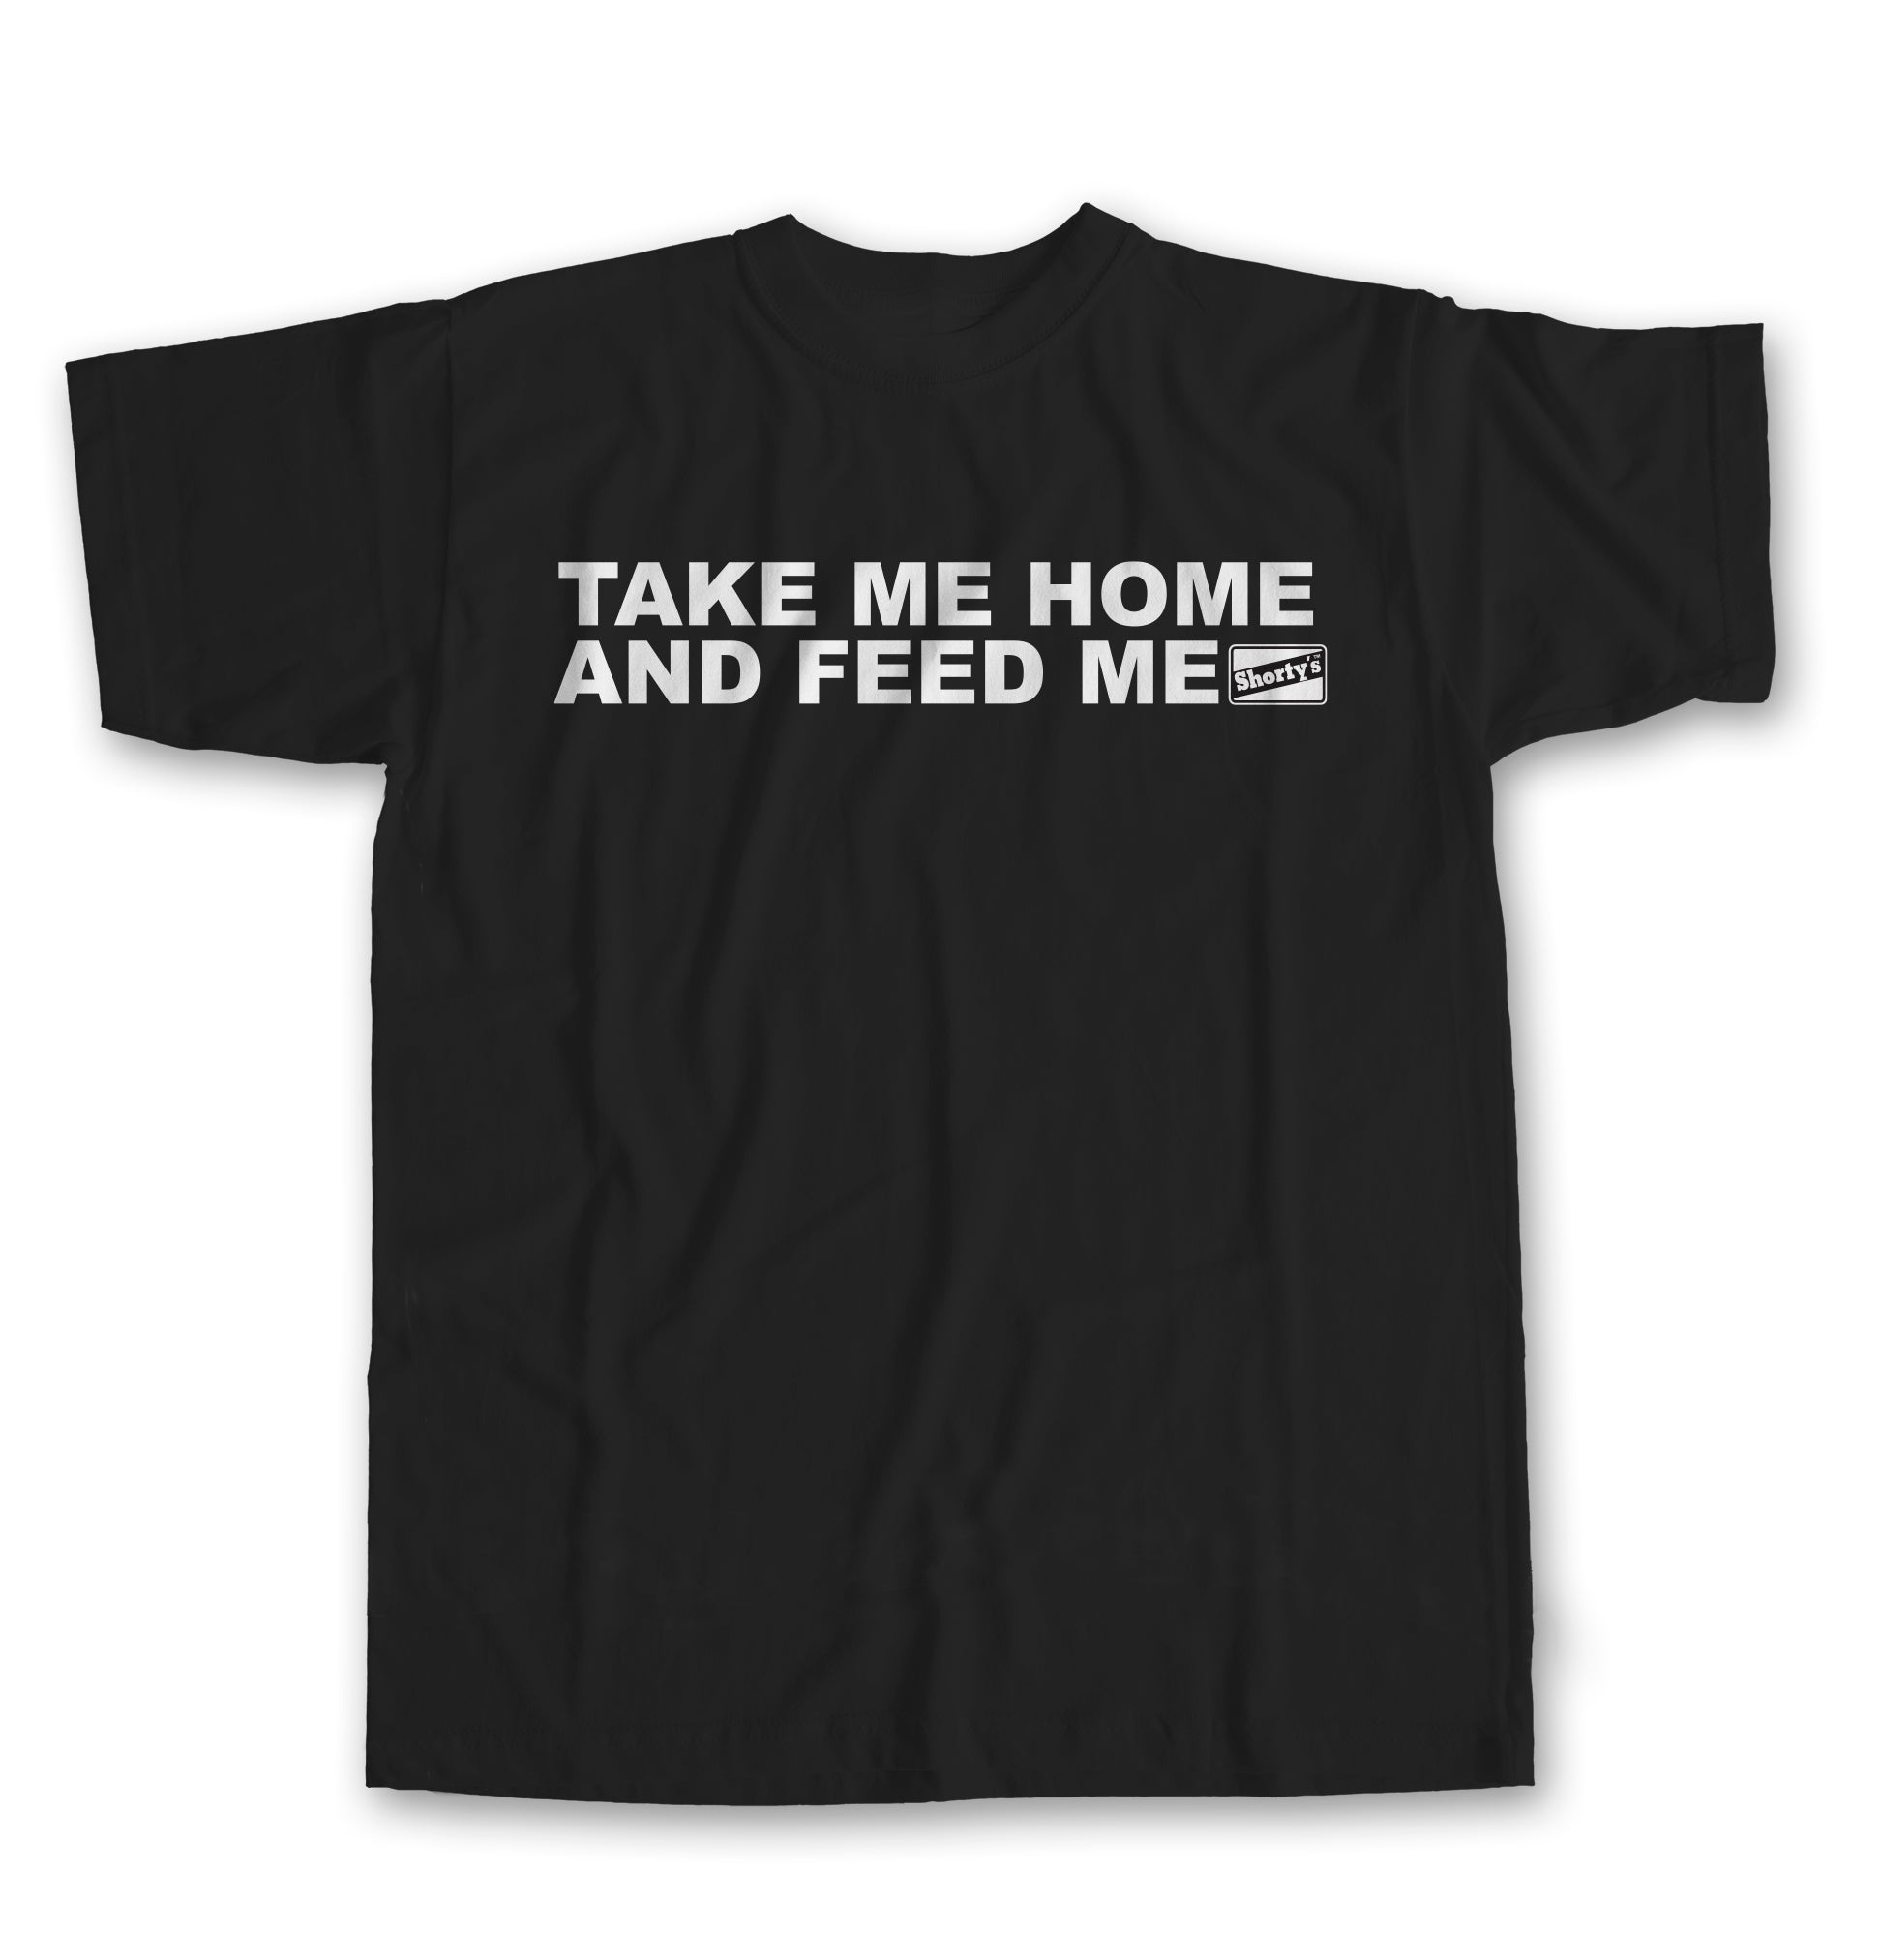 TAKE ME HOME AND FEED ME Short Sleeve T-shirt